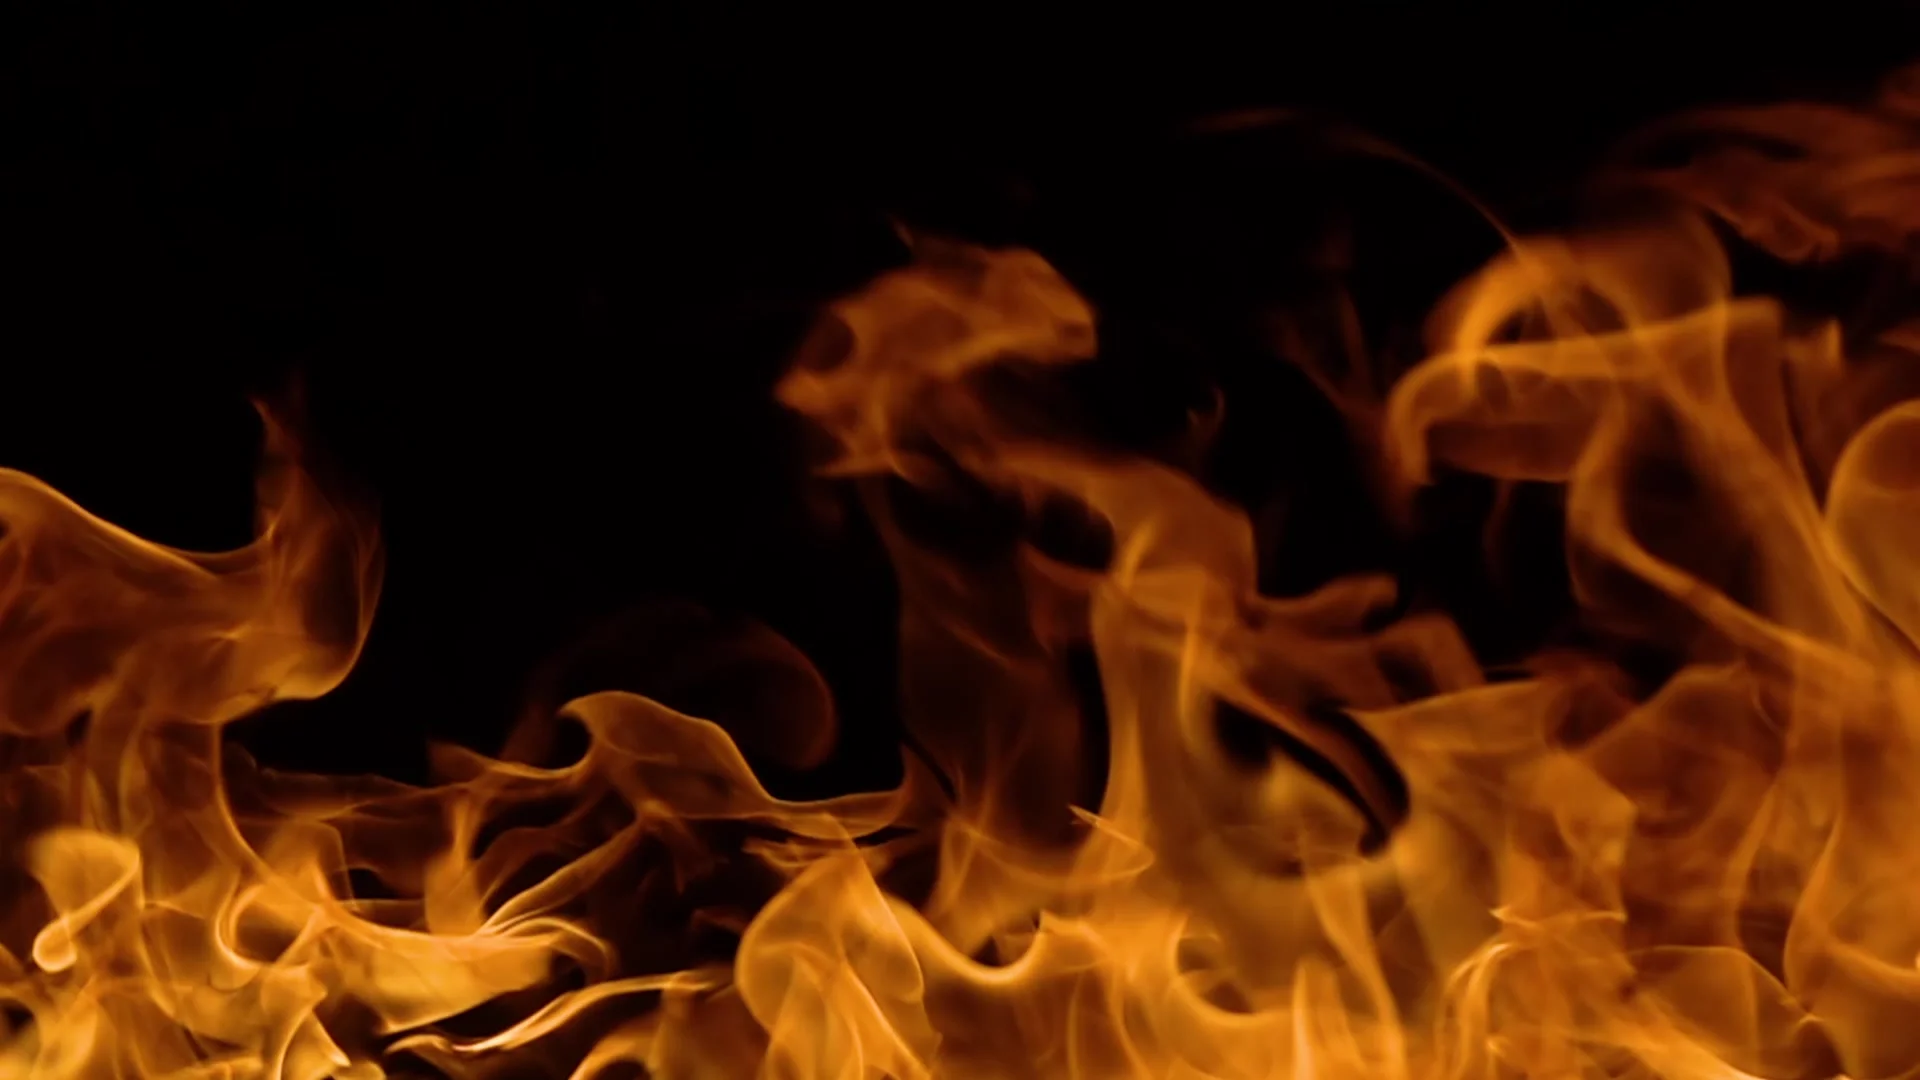 Fire Flame On Black Background Looping Stock Footage Video 100  Royaltyfree 665122  Shutterstock